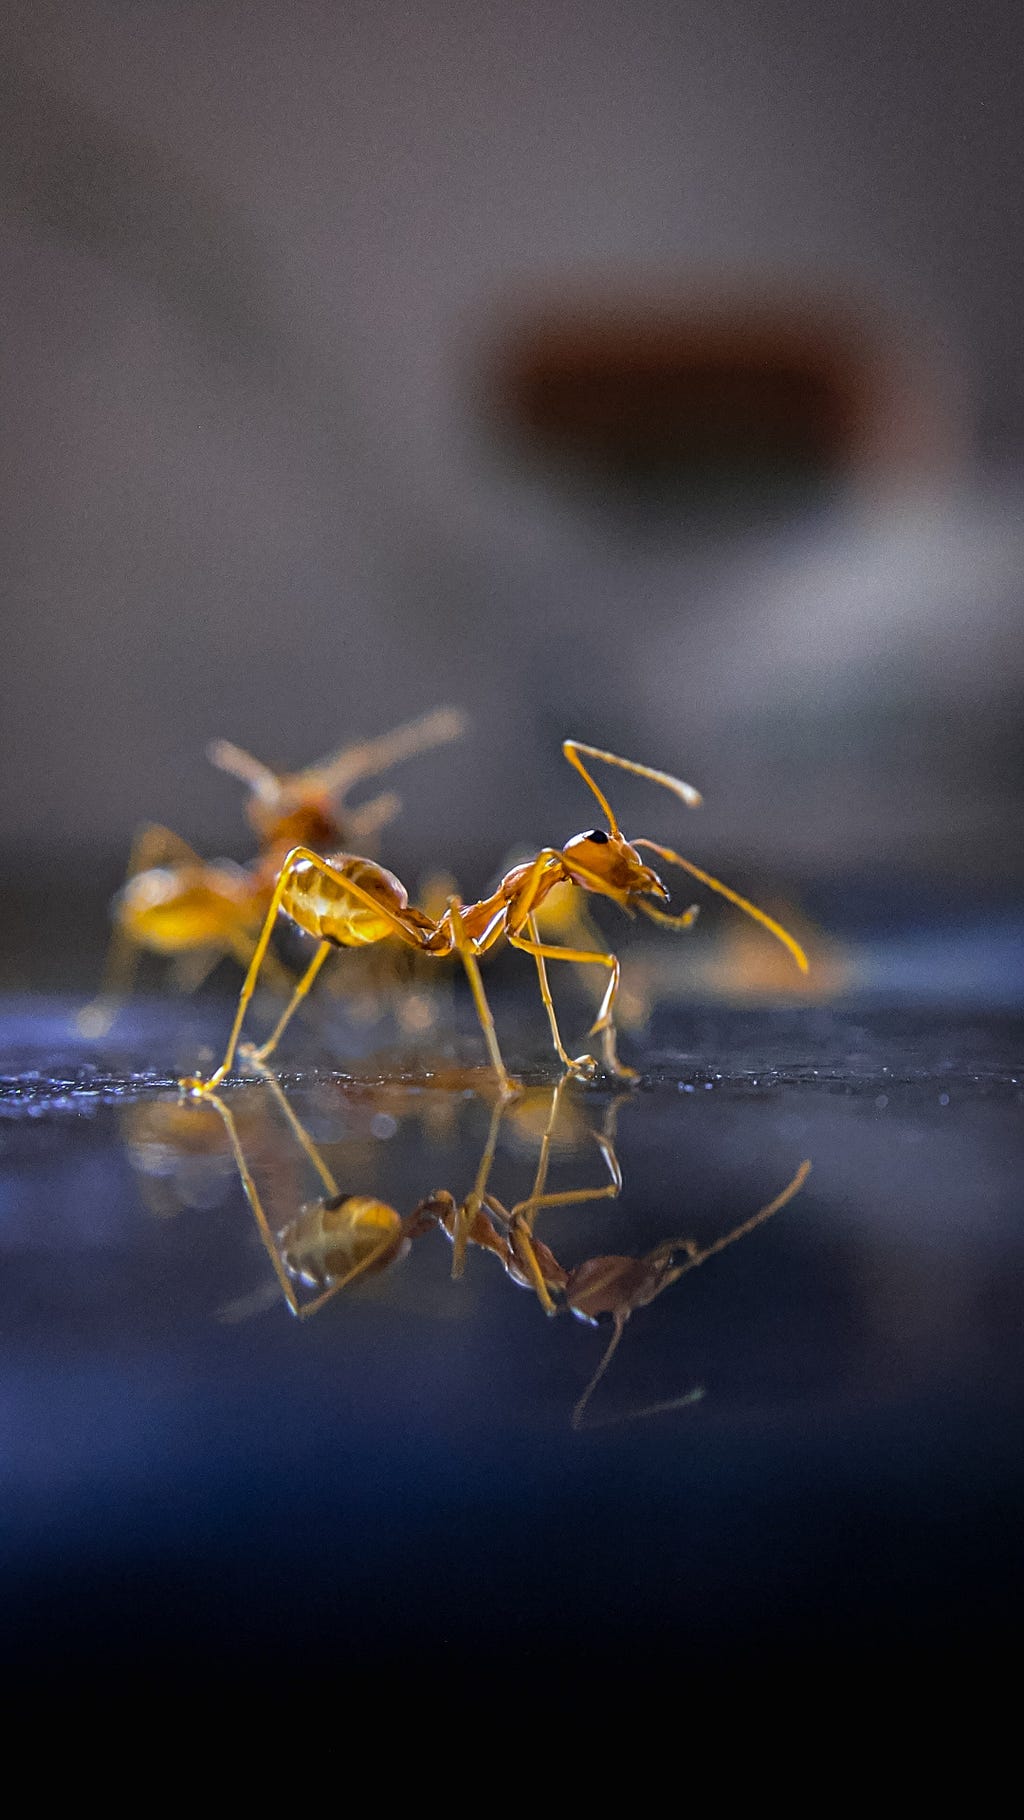 A macro photo of a red ant, in hyperfocus. Another ant is behind, but blurred.